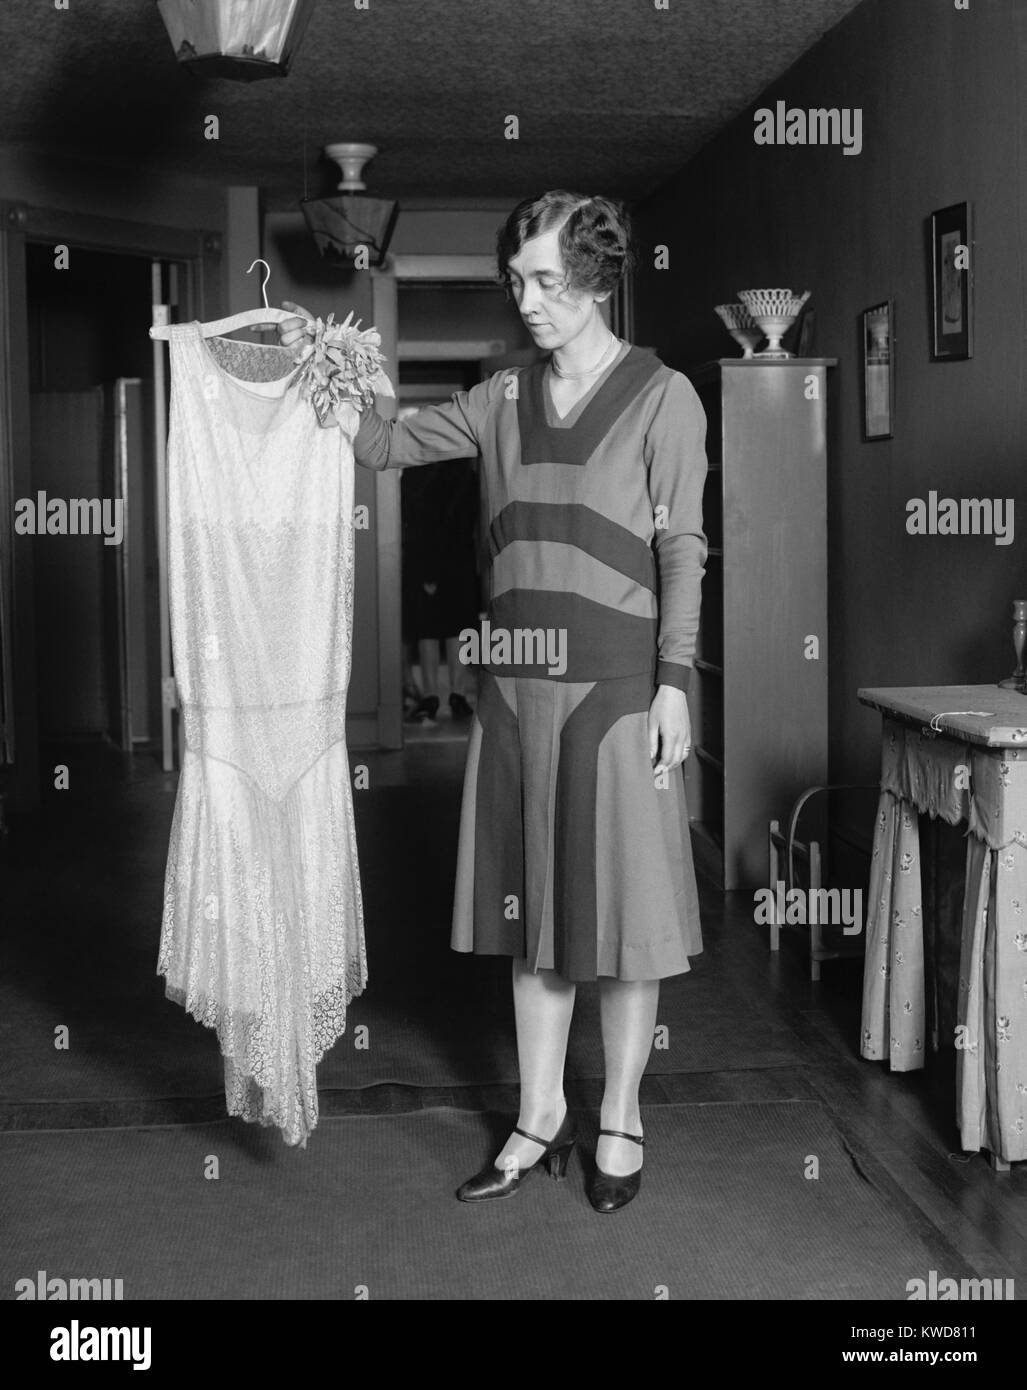 Young women quizzically evaluating new dress, May 14, 1925. (BSLOC 2015 16 248) Stock Photo